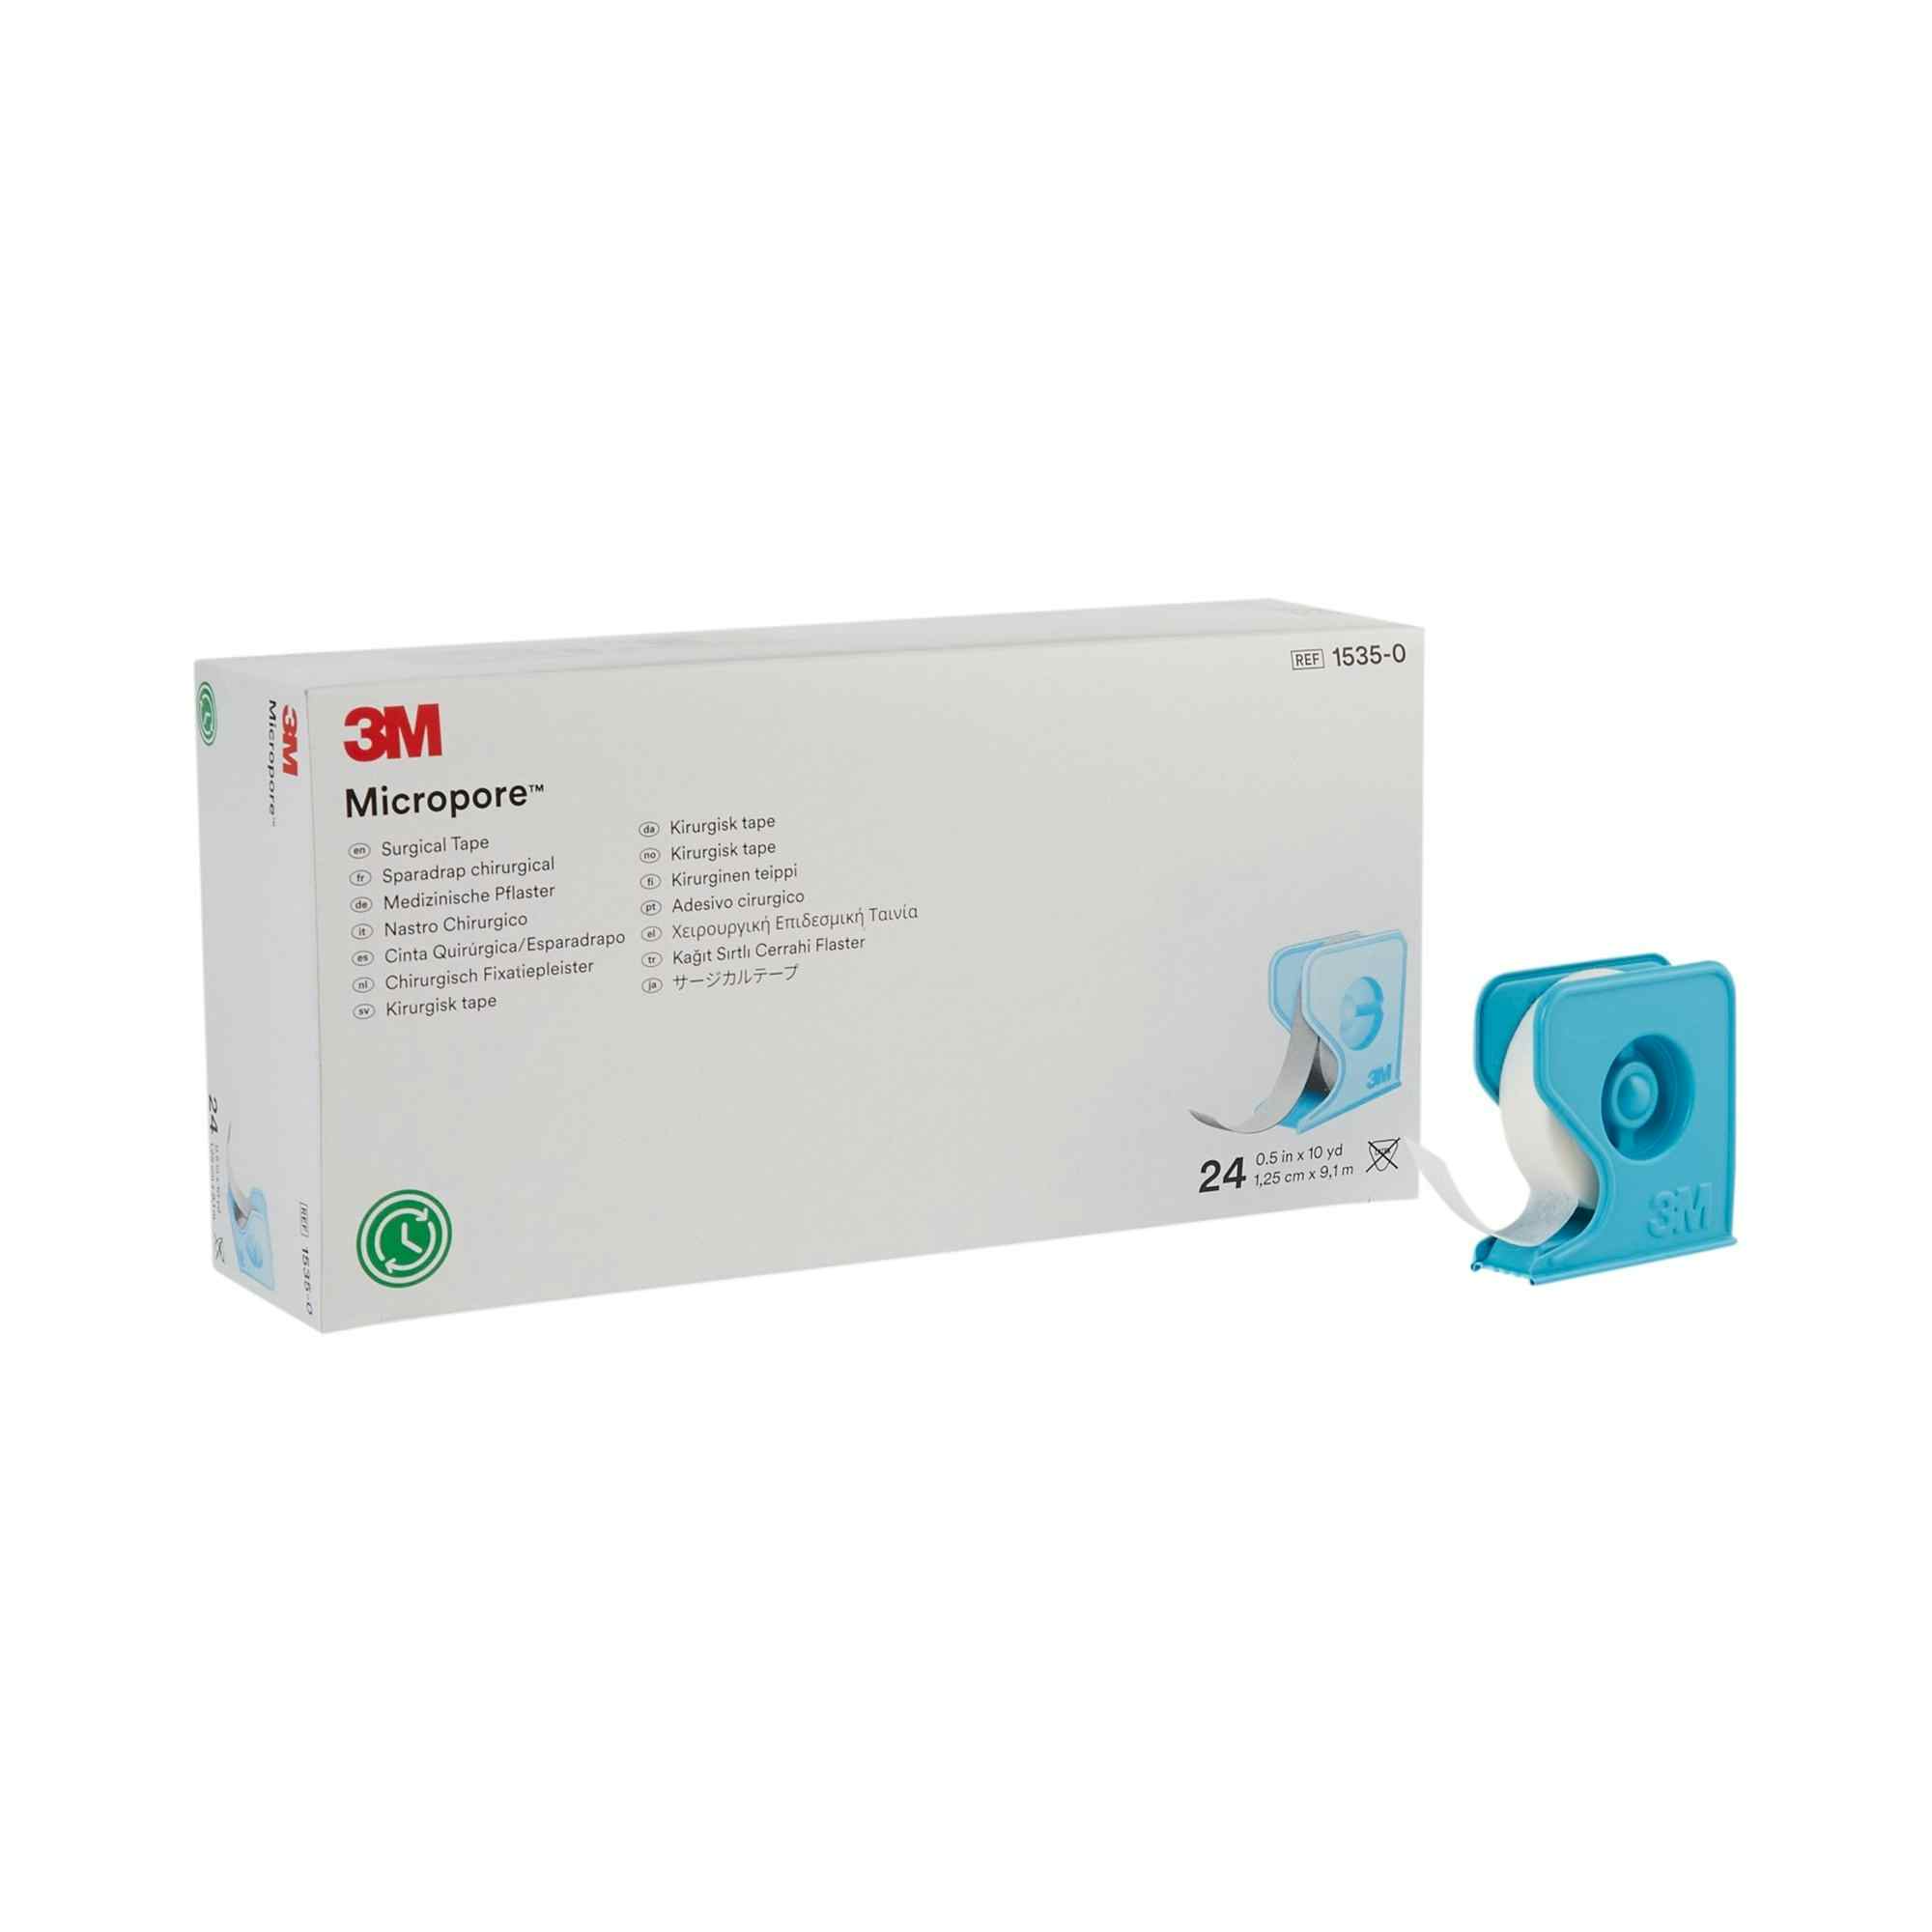 3M Micropore Surgical Tape with Dispenser, Paper, 0.5" X 10 yd, 1535-0, Box of 24